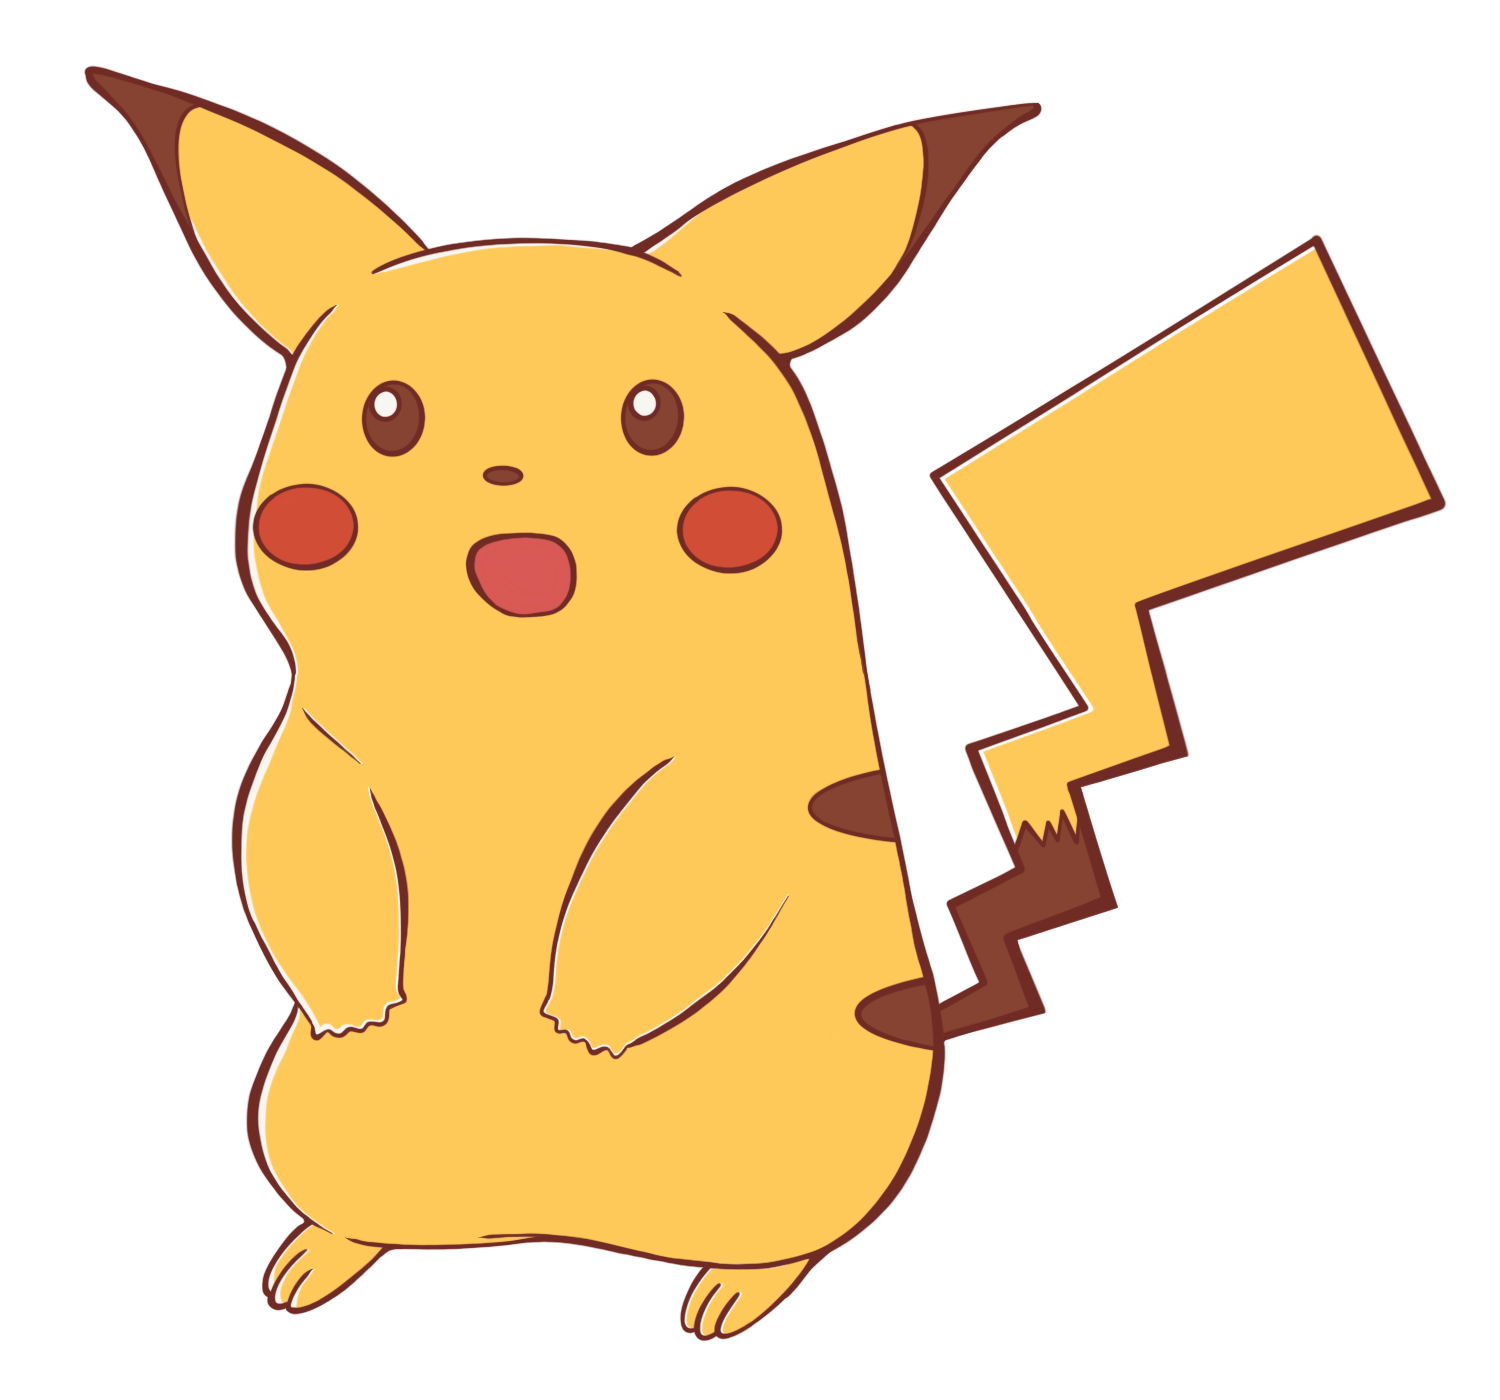 Surprised Pikachu PNG HD Quality